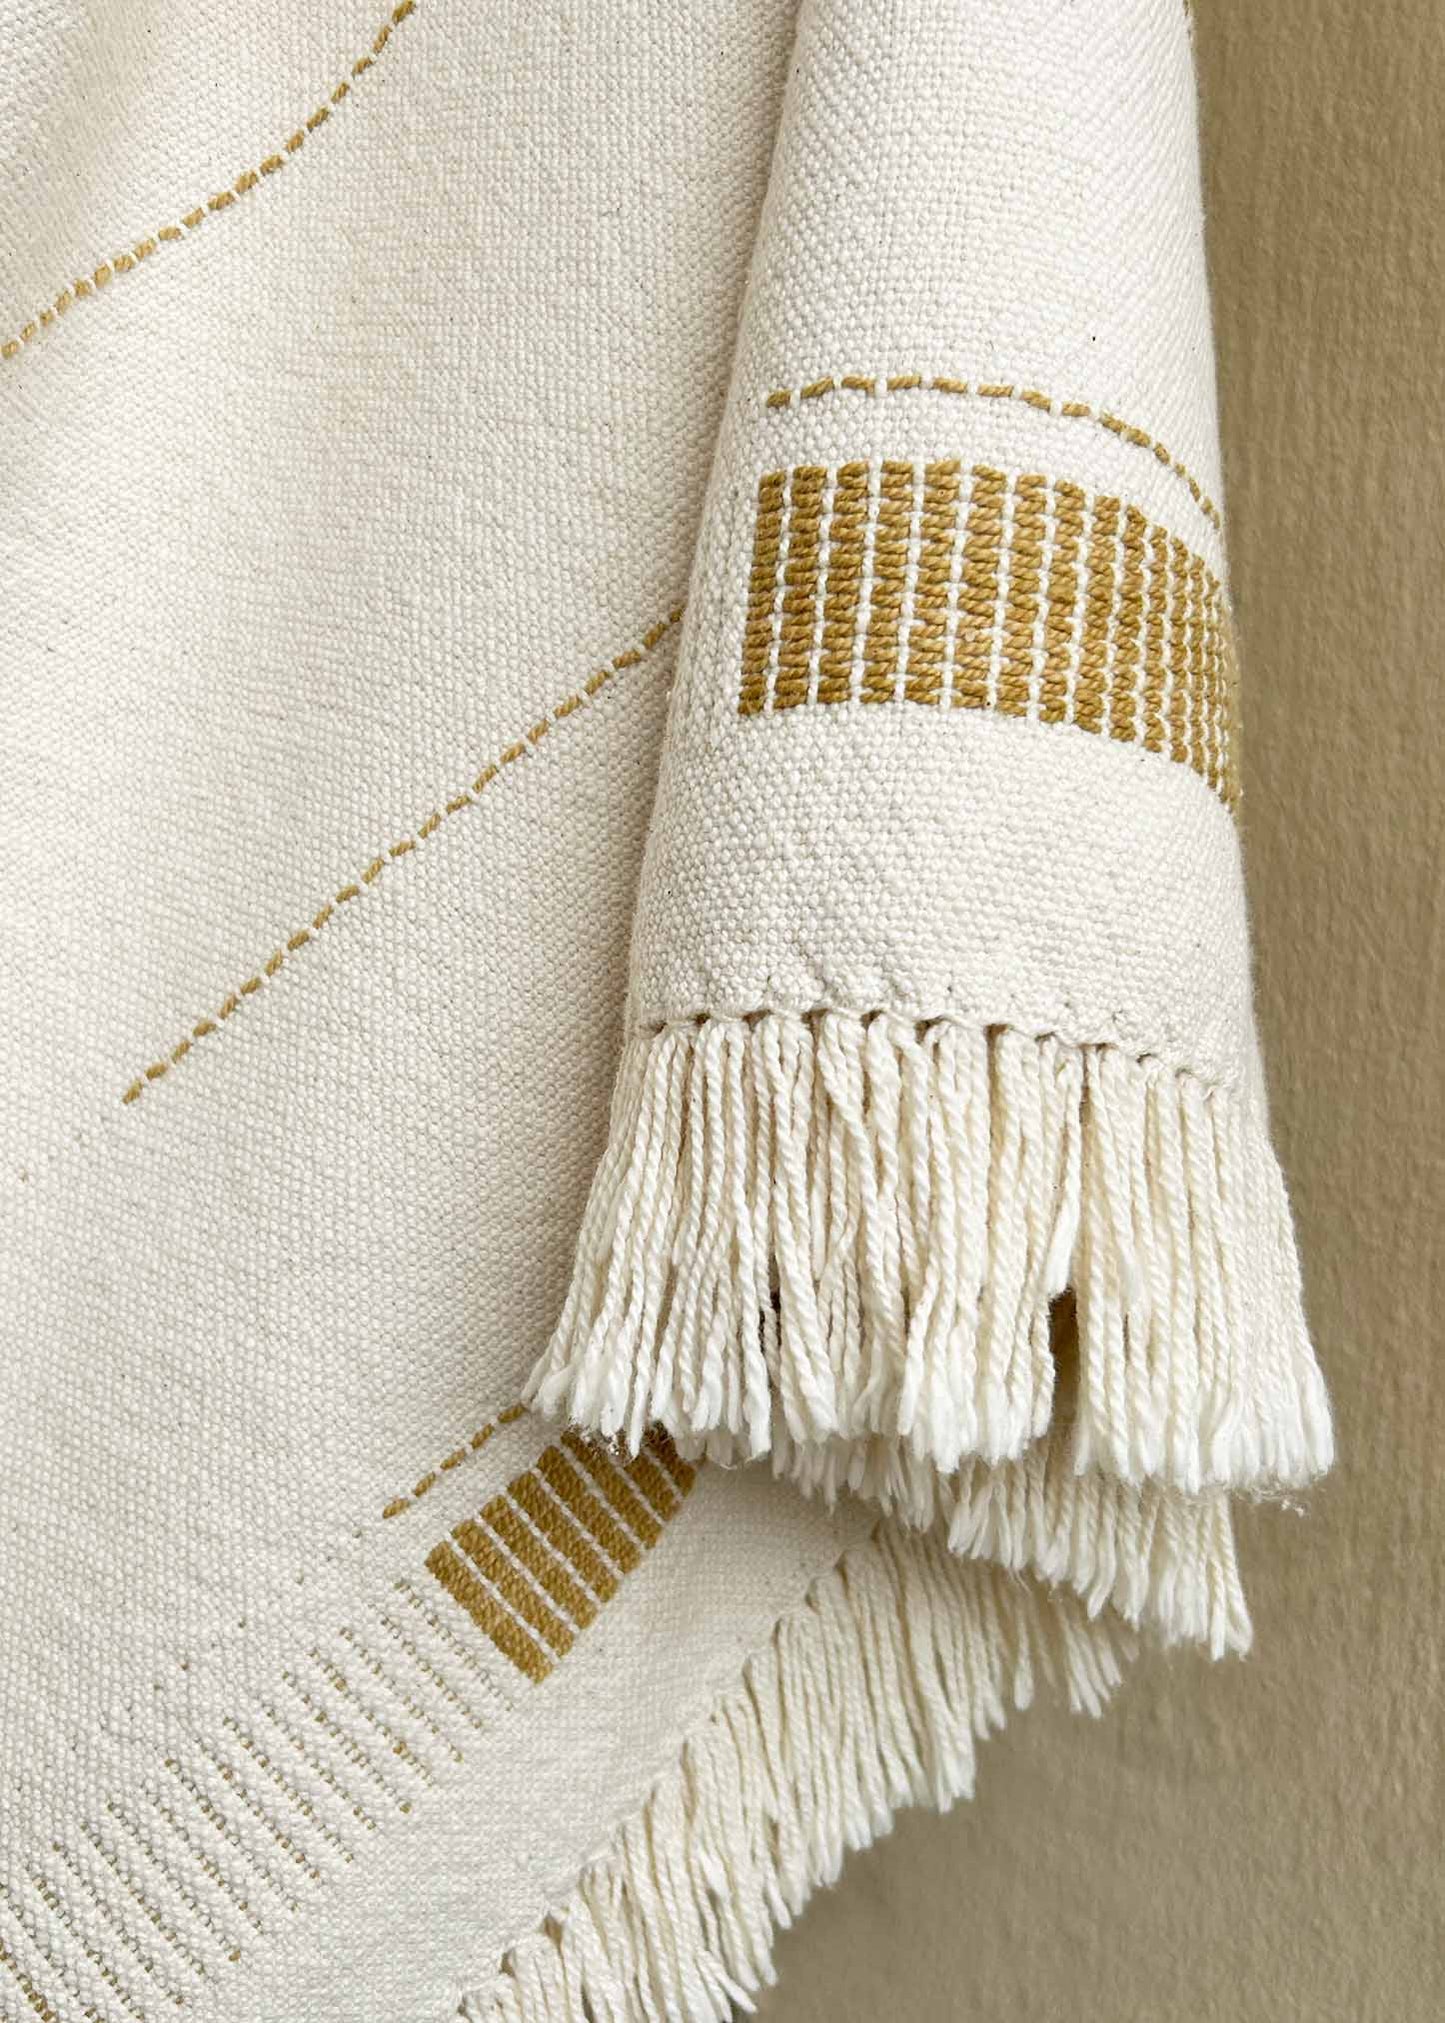 The Rib Throw, uniquely hand woven in Cape Town using natural, local cotton